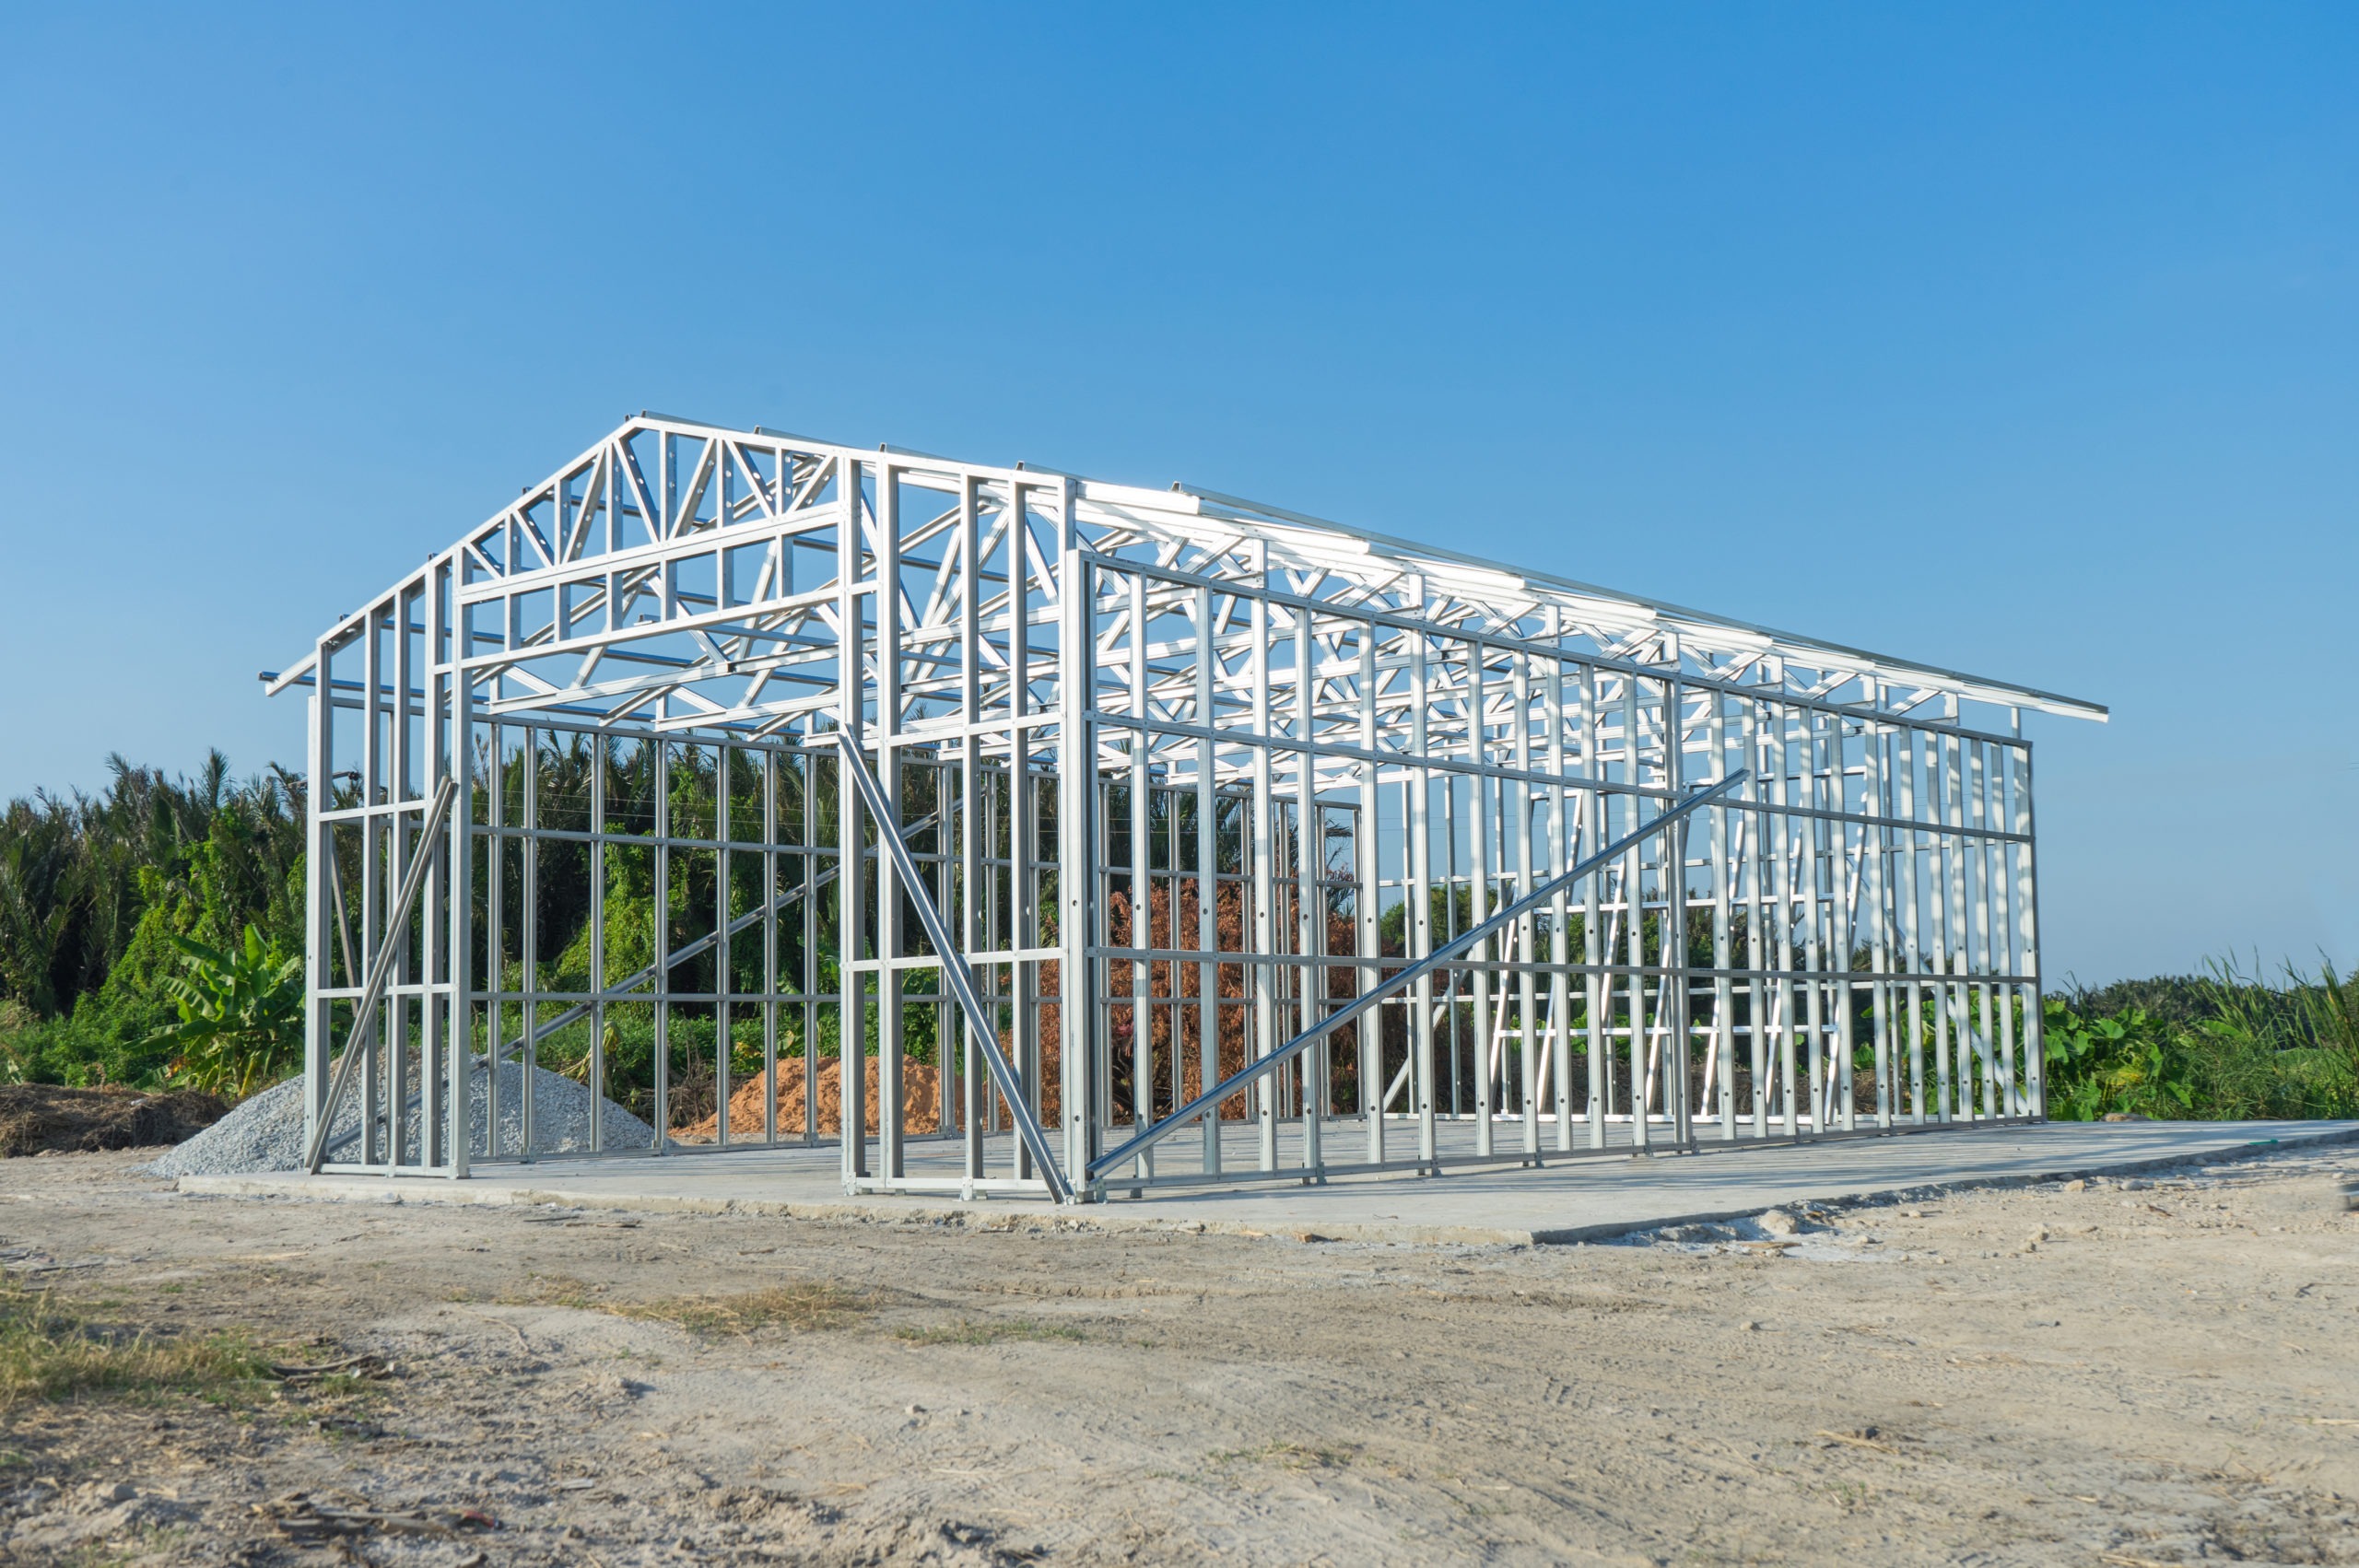 New technology steel frame for home construction